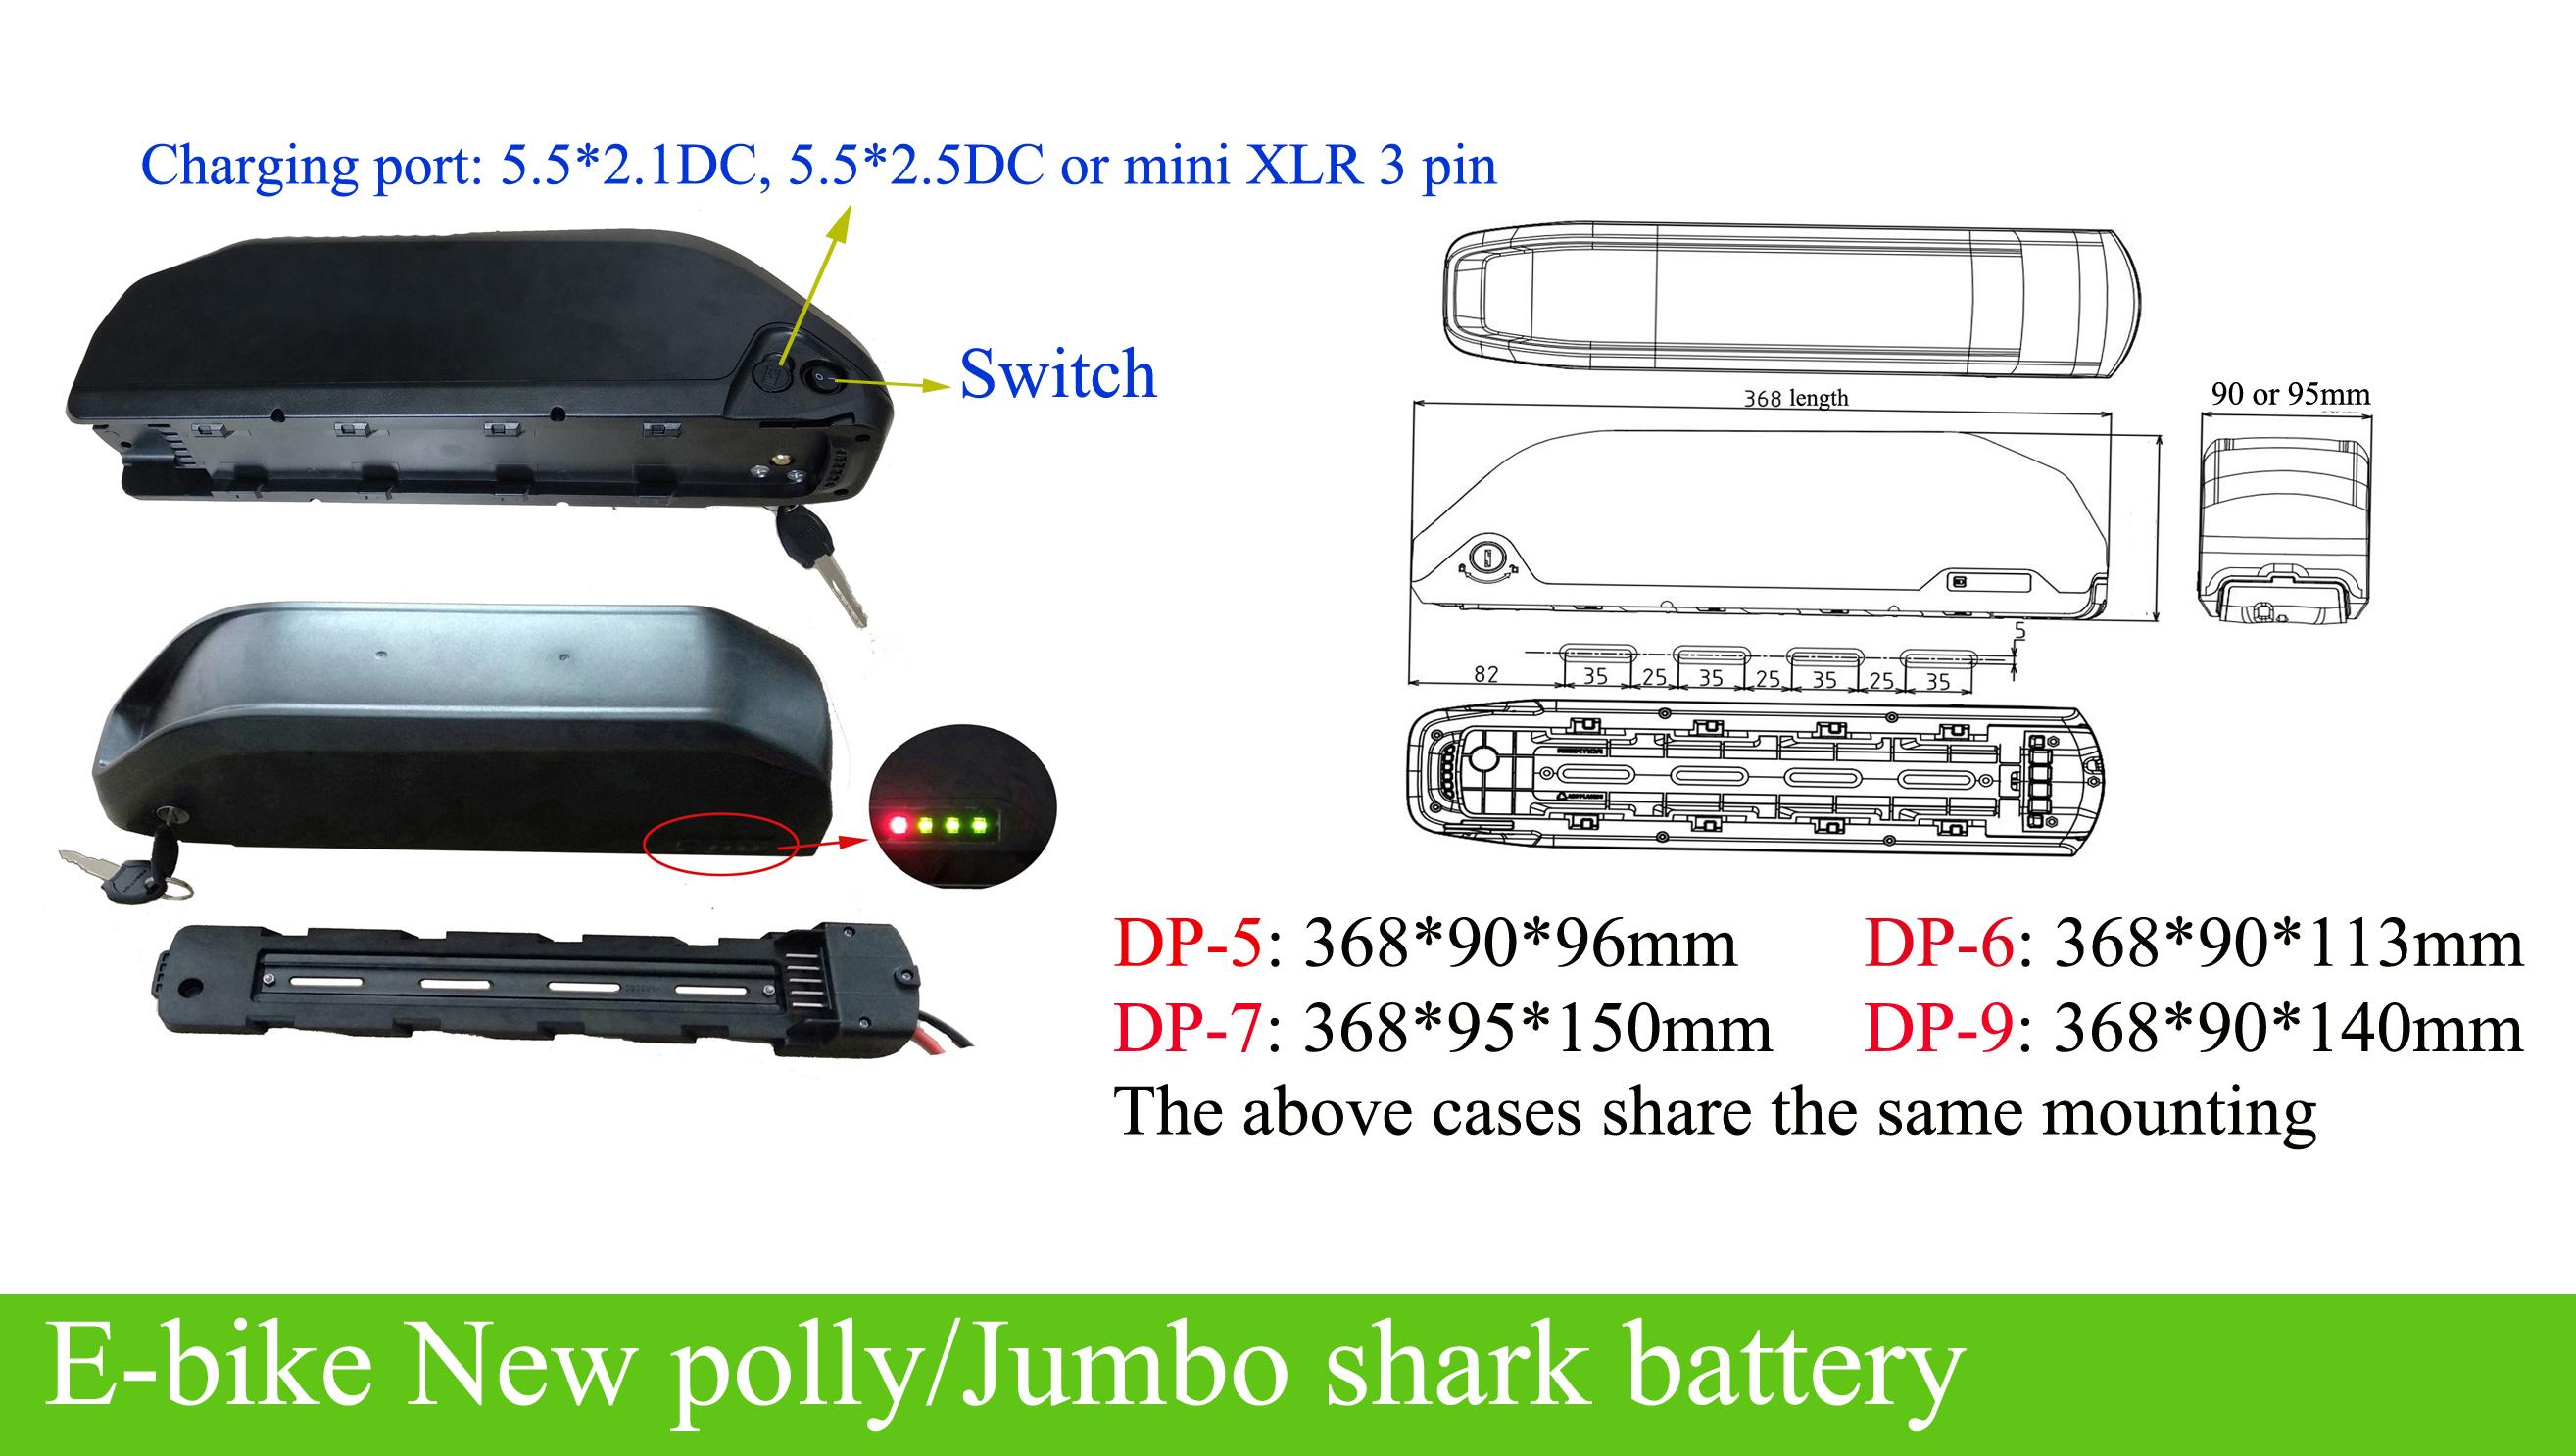 48V hailong-1, tigershark, new polly frame battery charger 120W 54.6V 2A  with 2.1DC connector-Greenbikekit BBS, ebike batteries, Bafang M620, Bafang  M600, Bafang M500, Bafang M510, KT controller with display